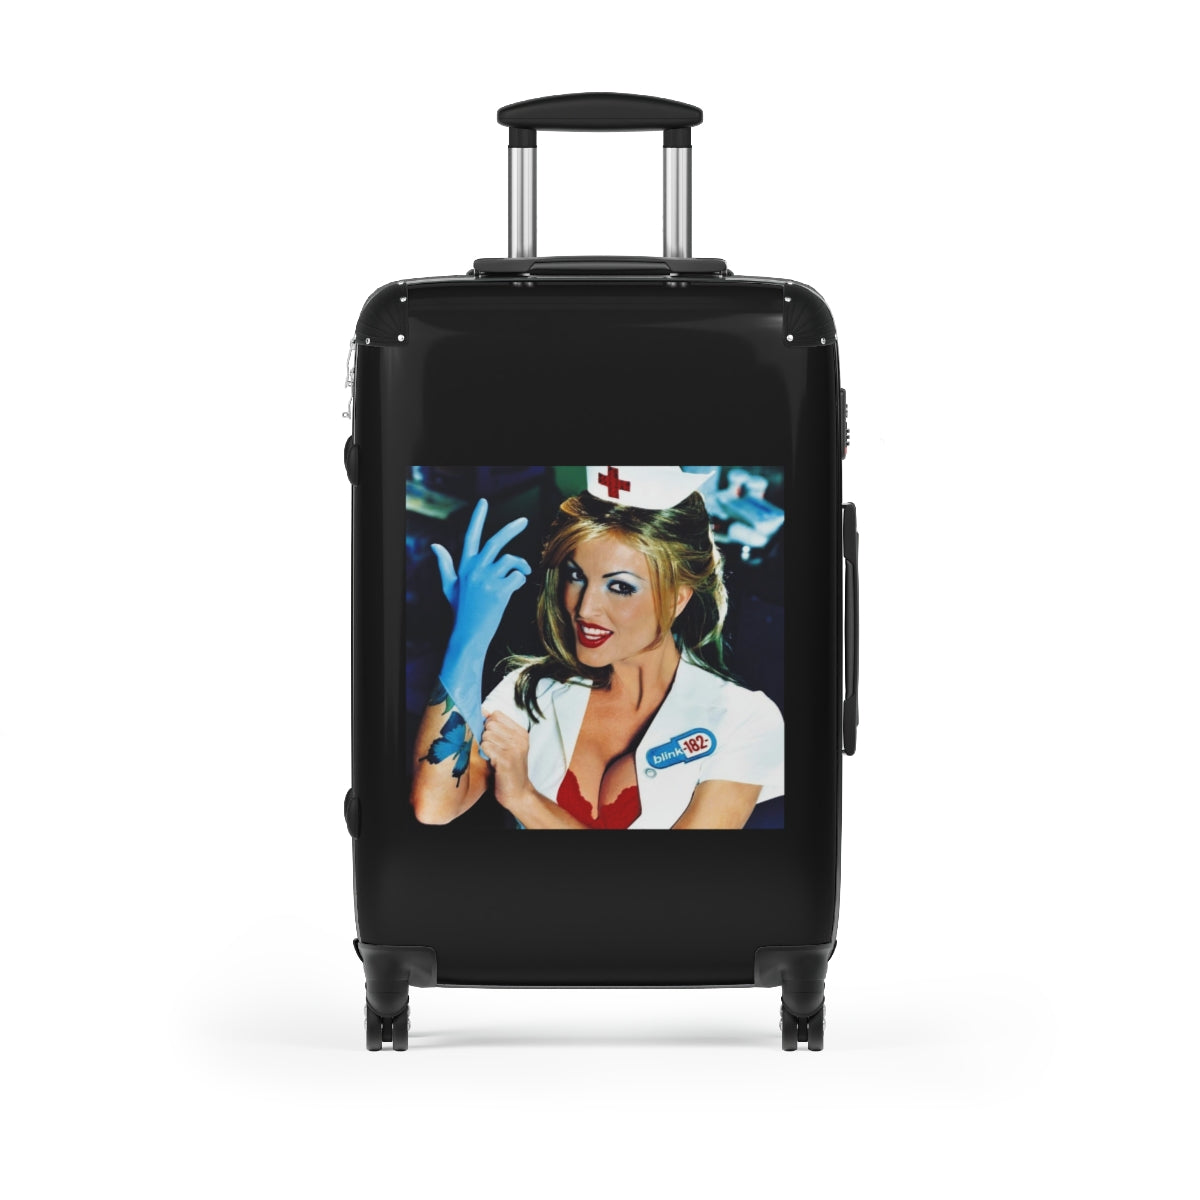 Getrott Blink182 Enema of the State 1999 Black Cabin Suitcase Extended Storage Adjustable Telescopic Handle Double wheeled Polycarbonate Hard-shell Built-in Lock-Bags-Geotrott